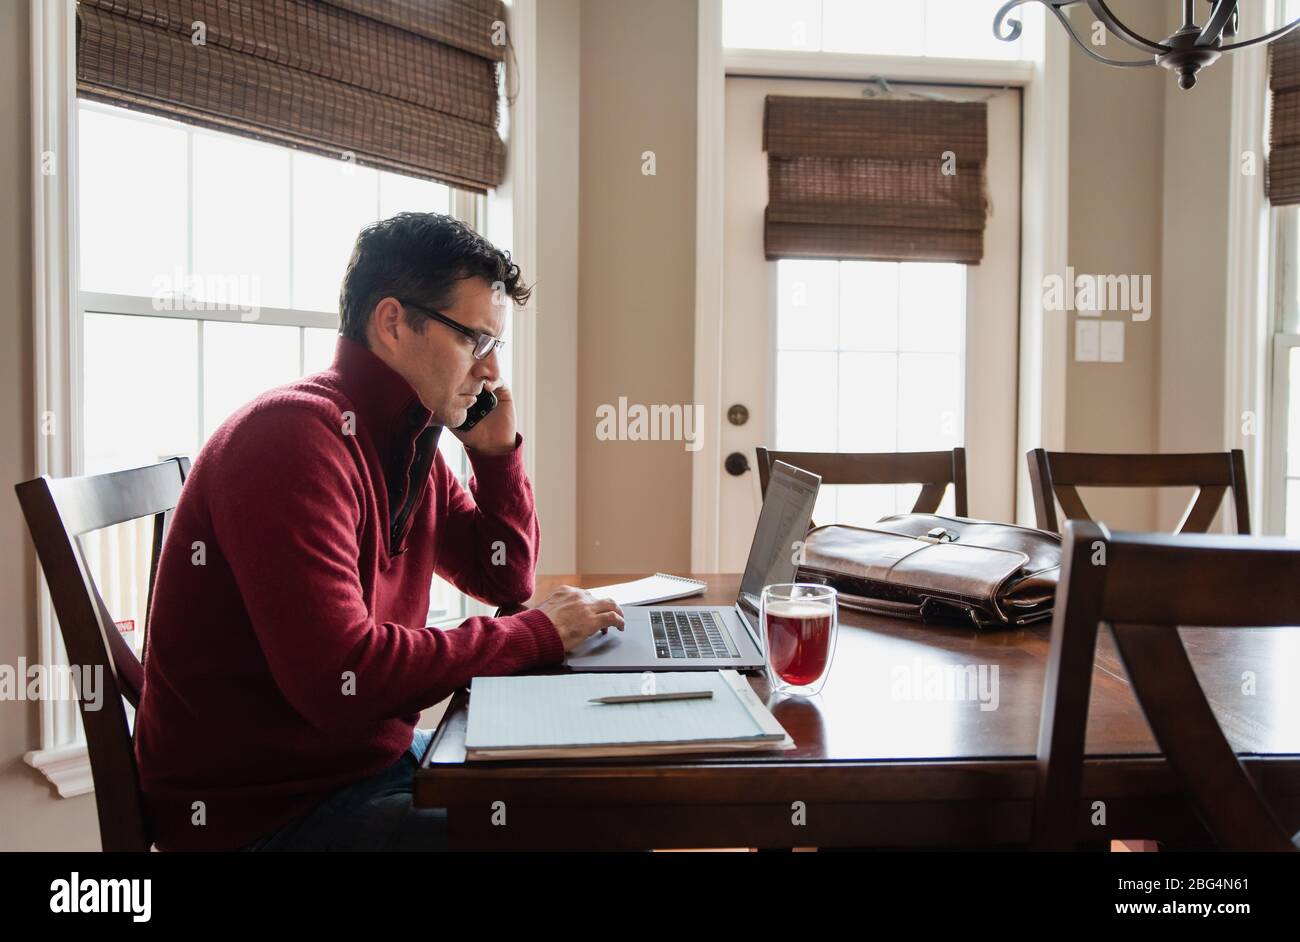 Man on cellphone working from home using a computer at a dining table. Stock Photo